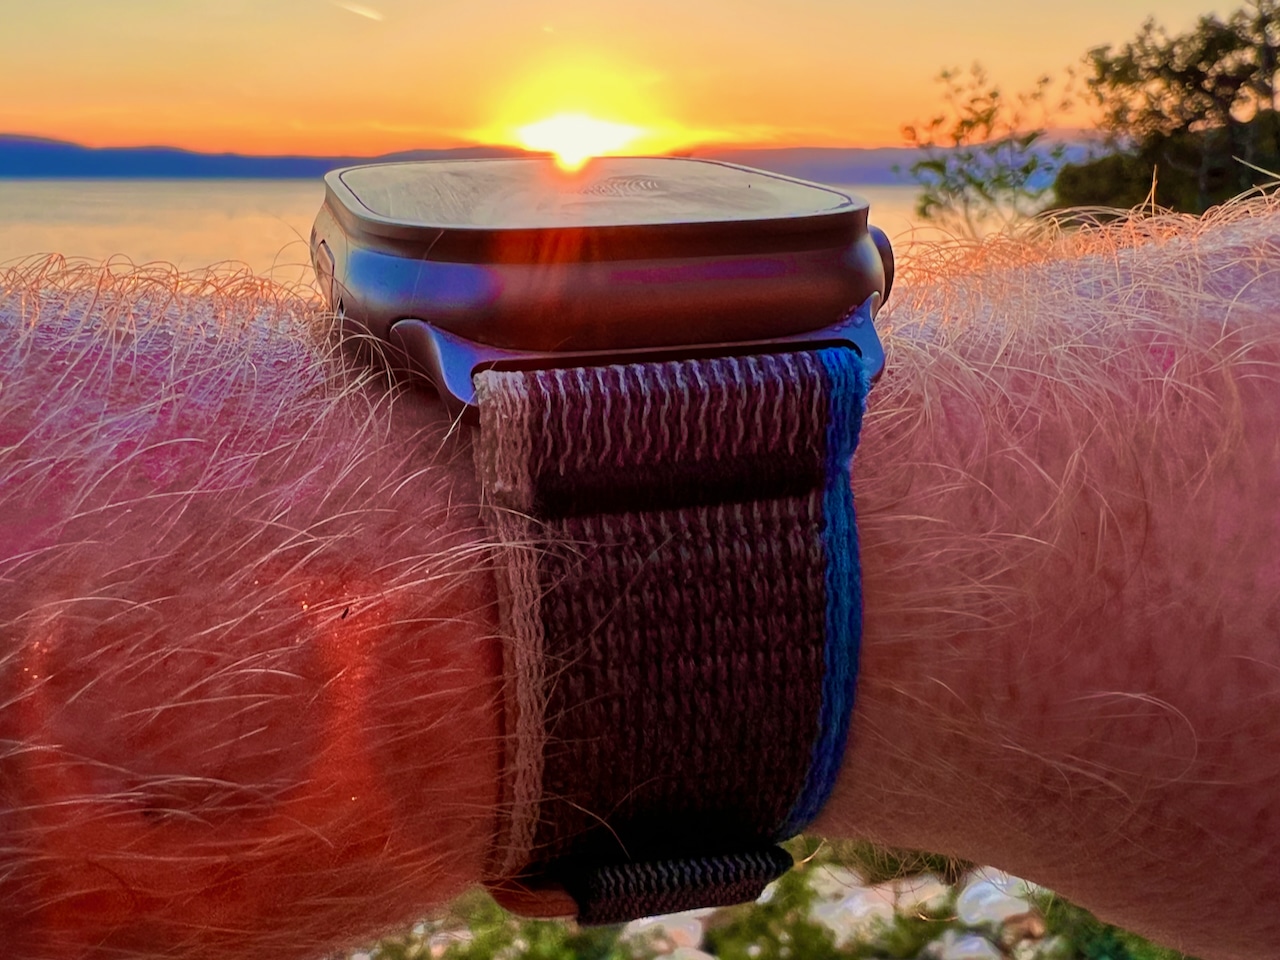 The Apple Watch Ultra has an extremely robust case - even though I've been wearing it for over a year and putting a lot of strain on it, it still has hardly any scratches on the case or the sapphire crystal. Photo: Sascha Tegtmeyer